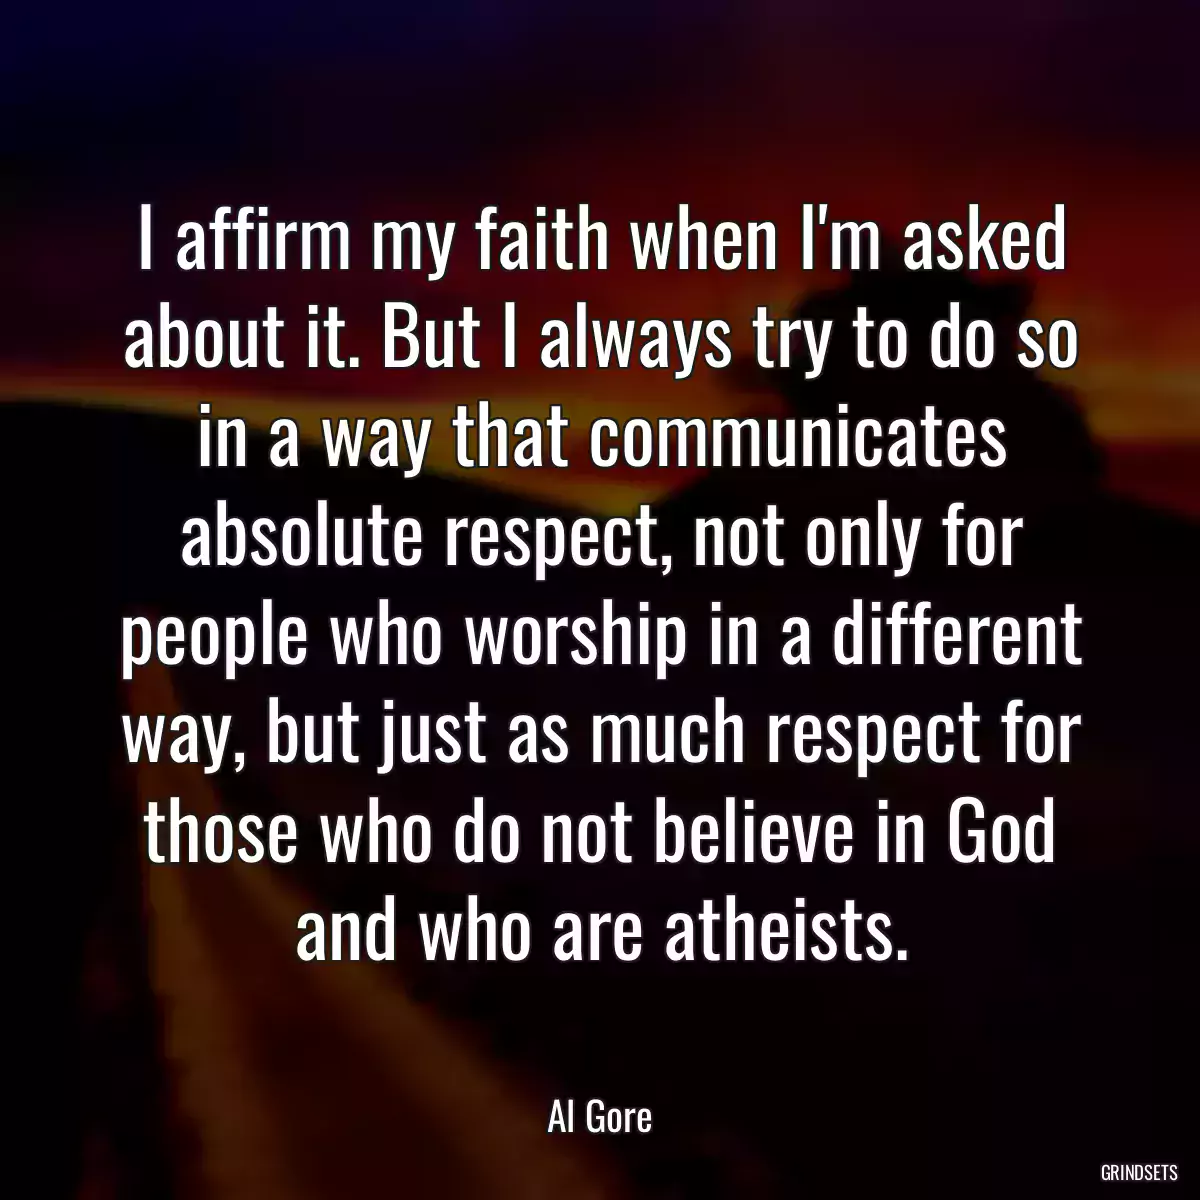 I affirm my faith when I\'m asked about it. But I always try to do so in a way that communicates absolute respect, not only for people who worship in a different way, but just as much respect for those who do not believe in God and who are atheists.